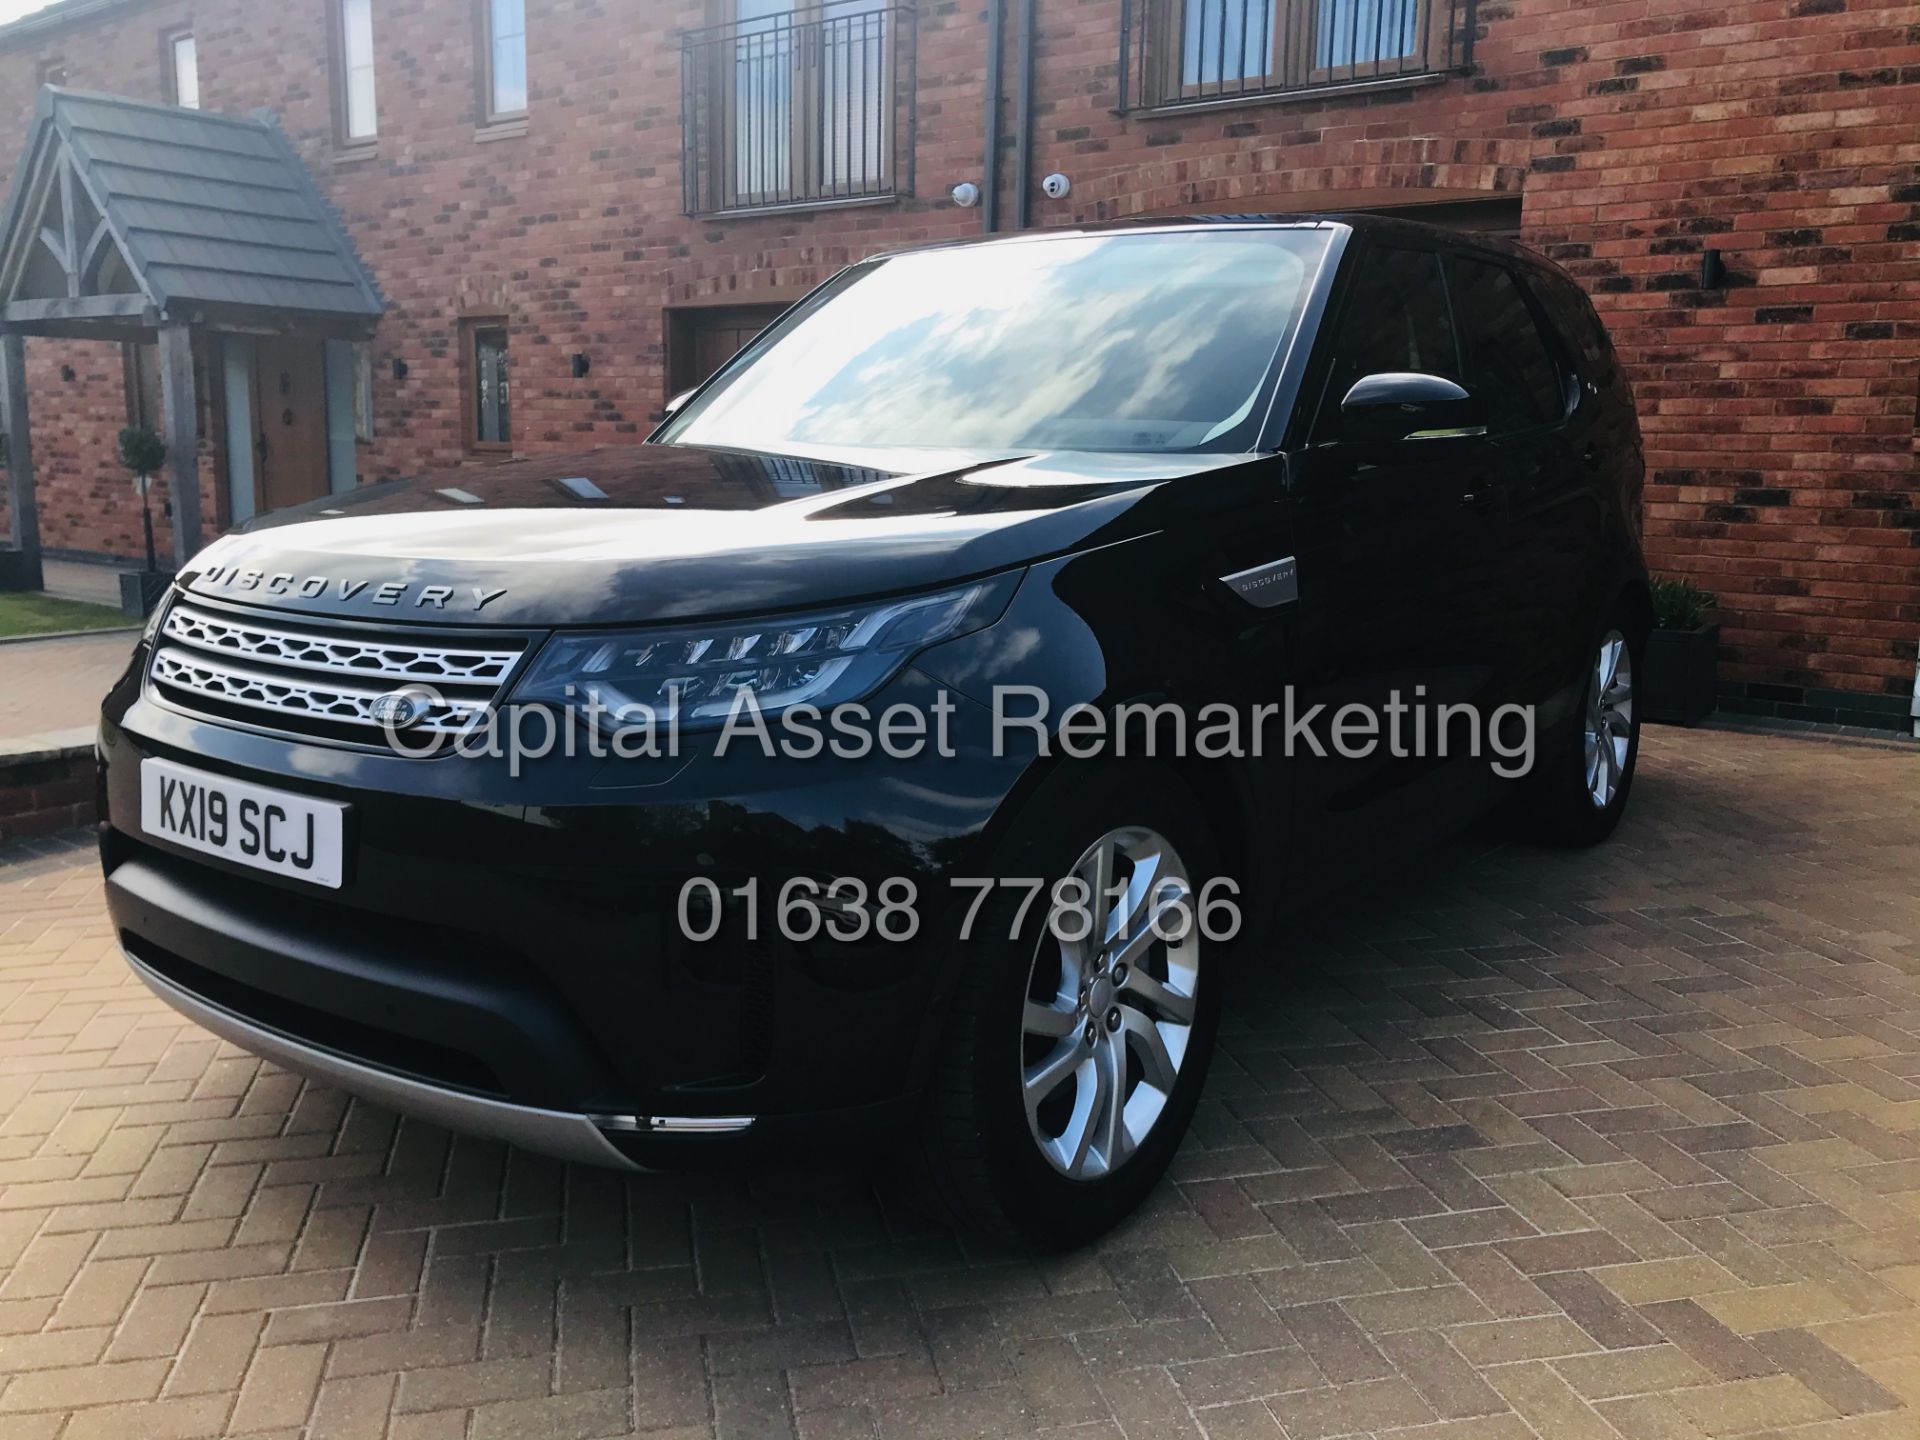 ON SALE LAND ROVER DISCOVERY 3.0 SDV6 "HSE EDITION"7 SEATER(19 REG) 1 OWNER-HUGE SPEC *PAN ROOF* 15K - Image 5 of 27